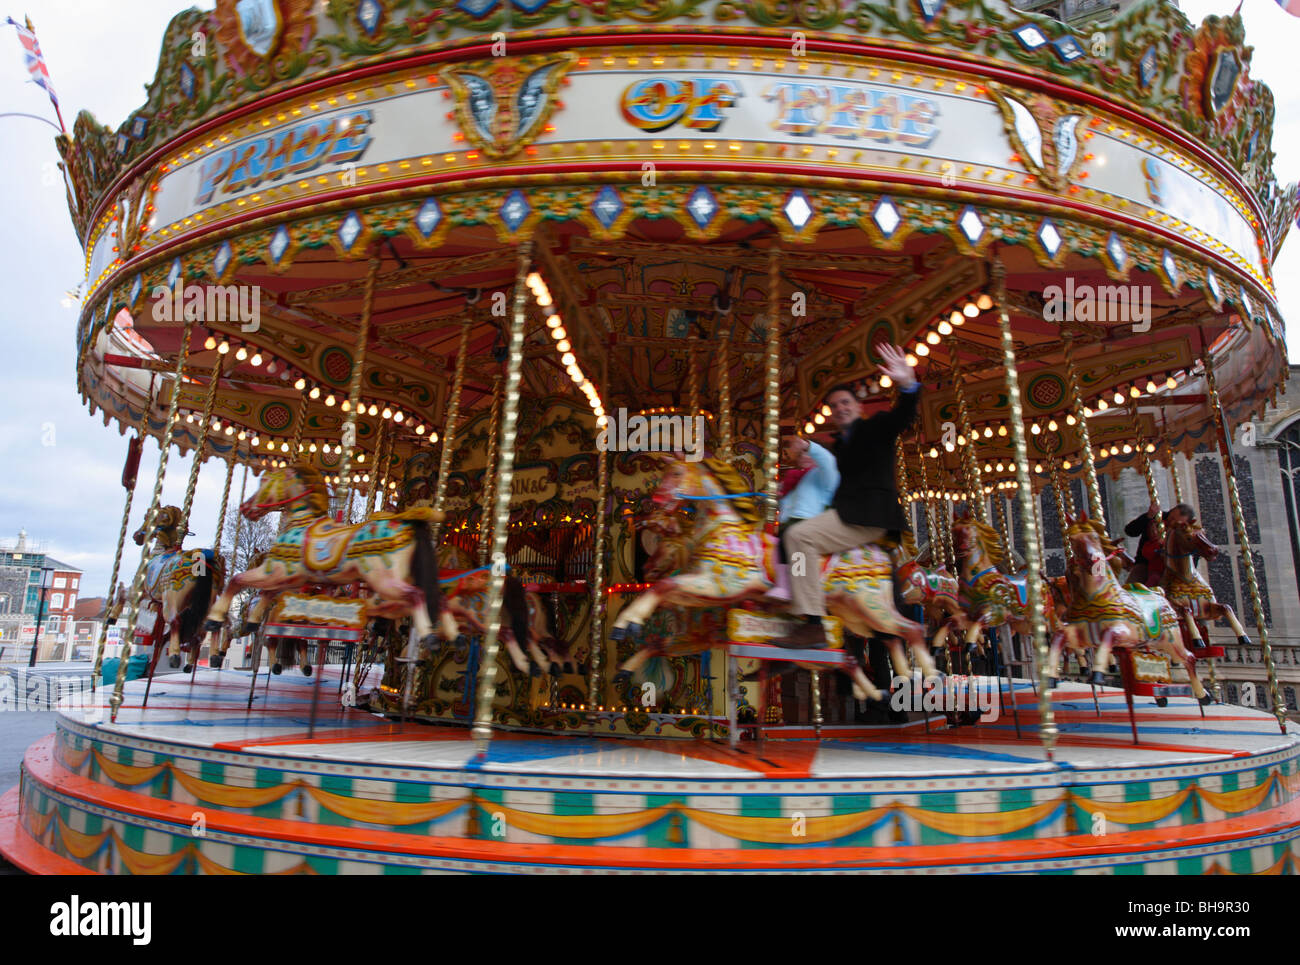 The Pride of the South Galloping Horses carousel ride working in Nowich. Stock Photo